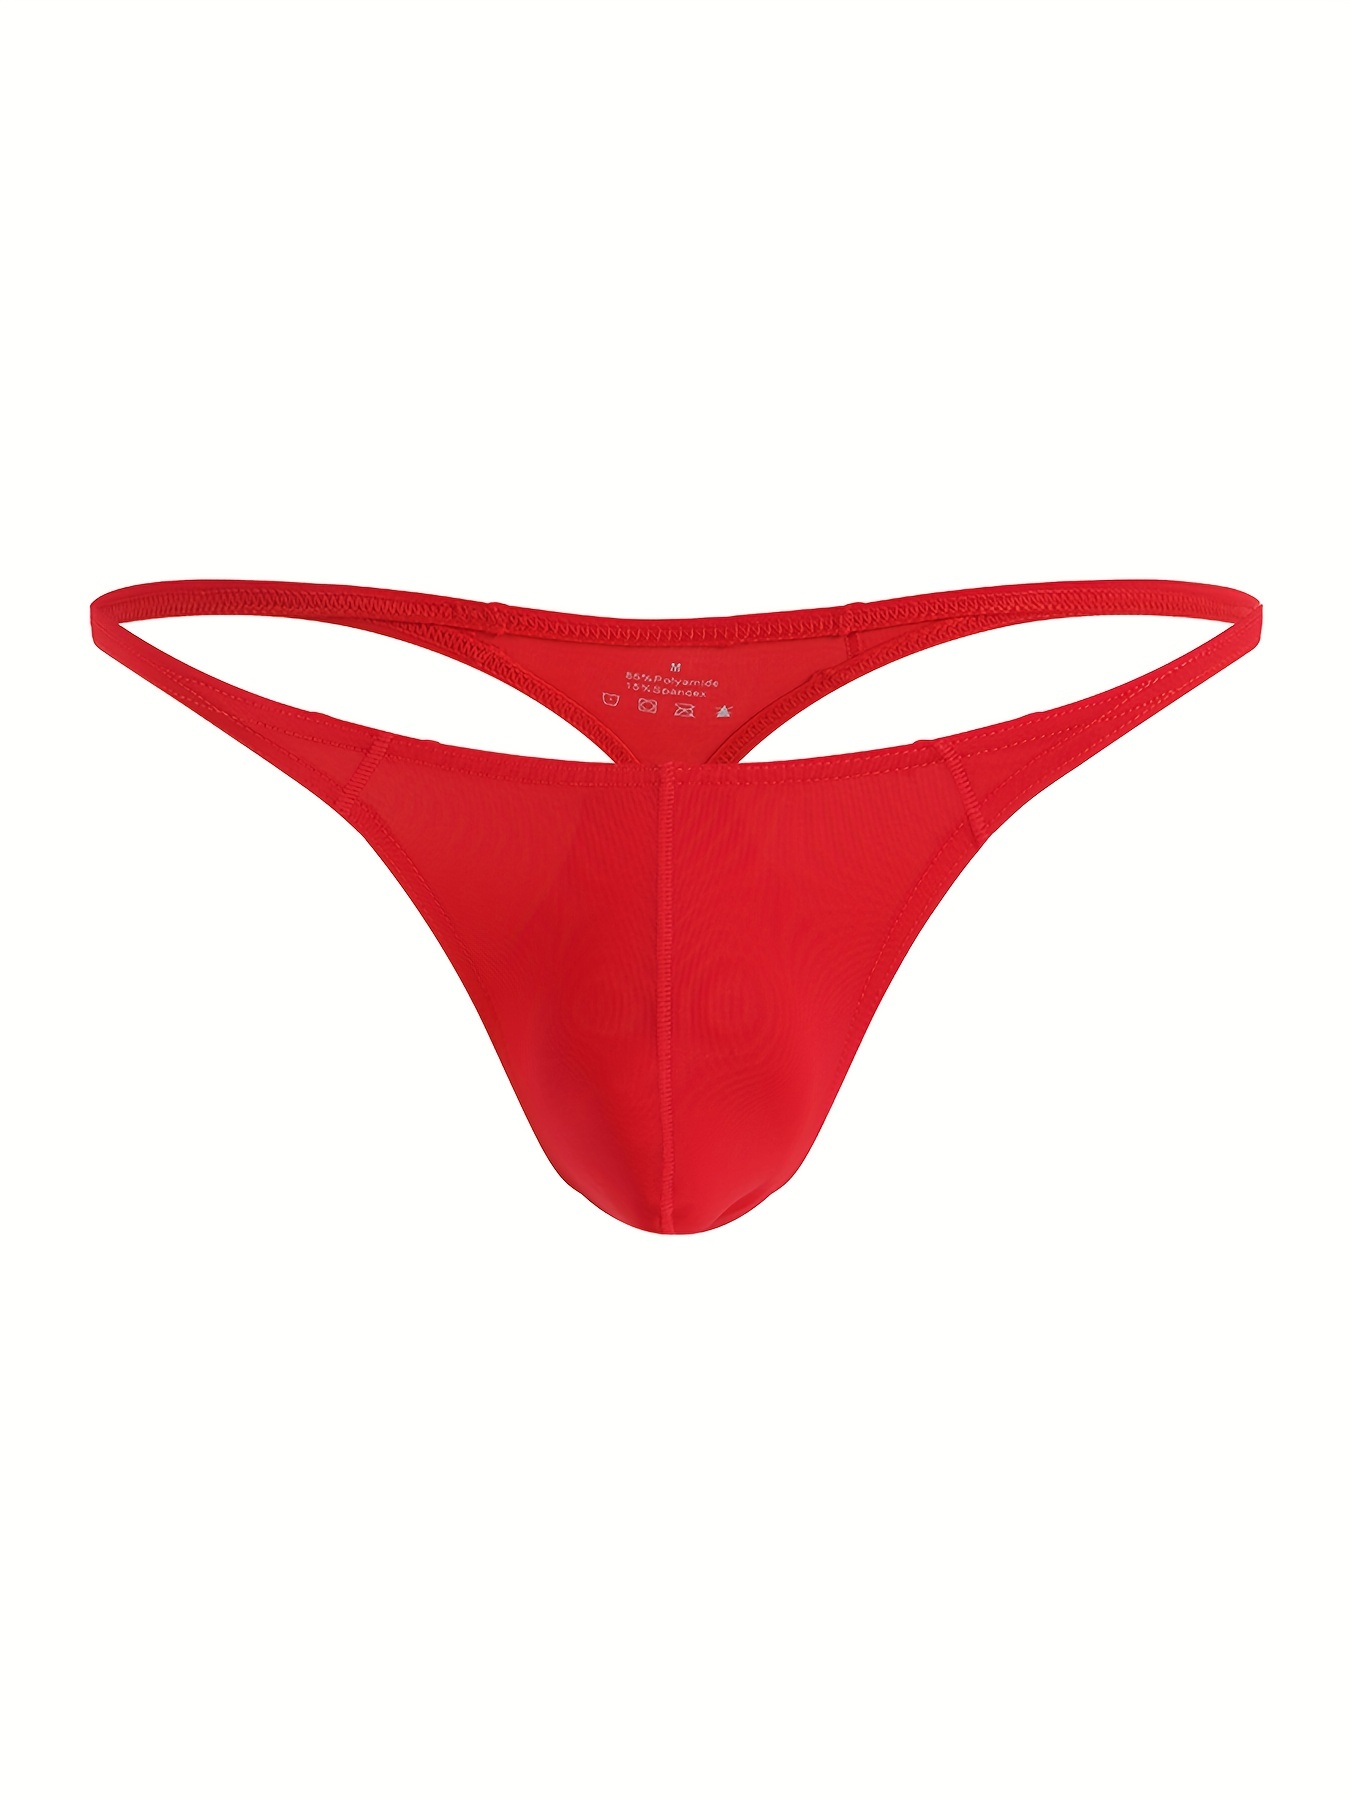 Red G Strings, String Thongs, G String Knickers